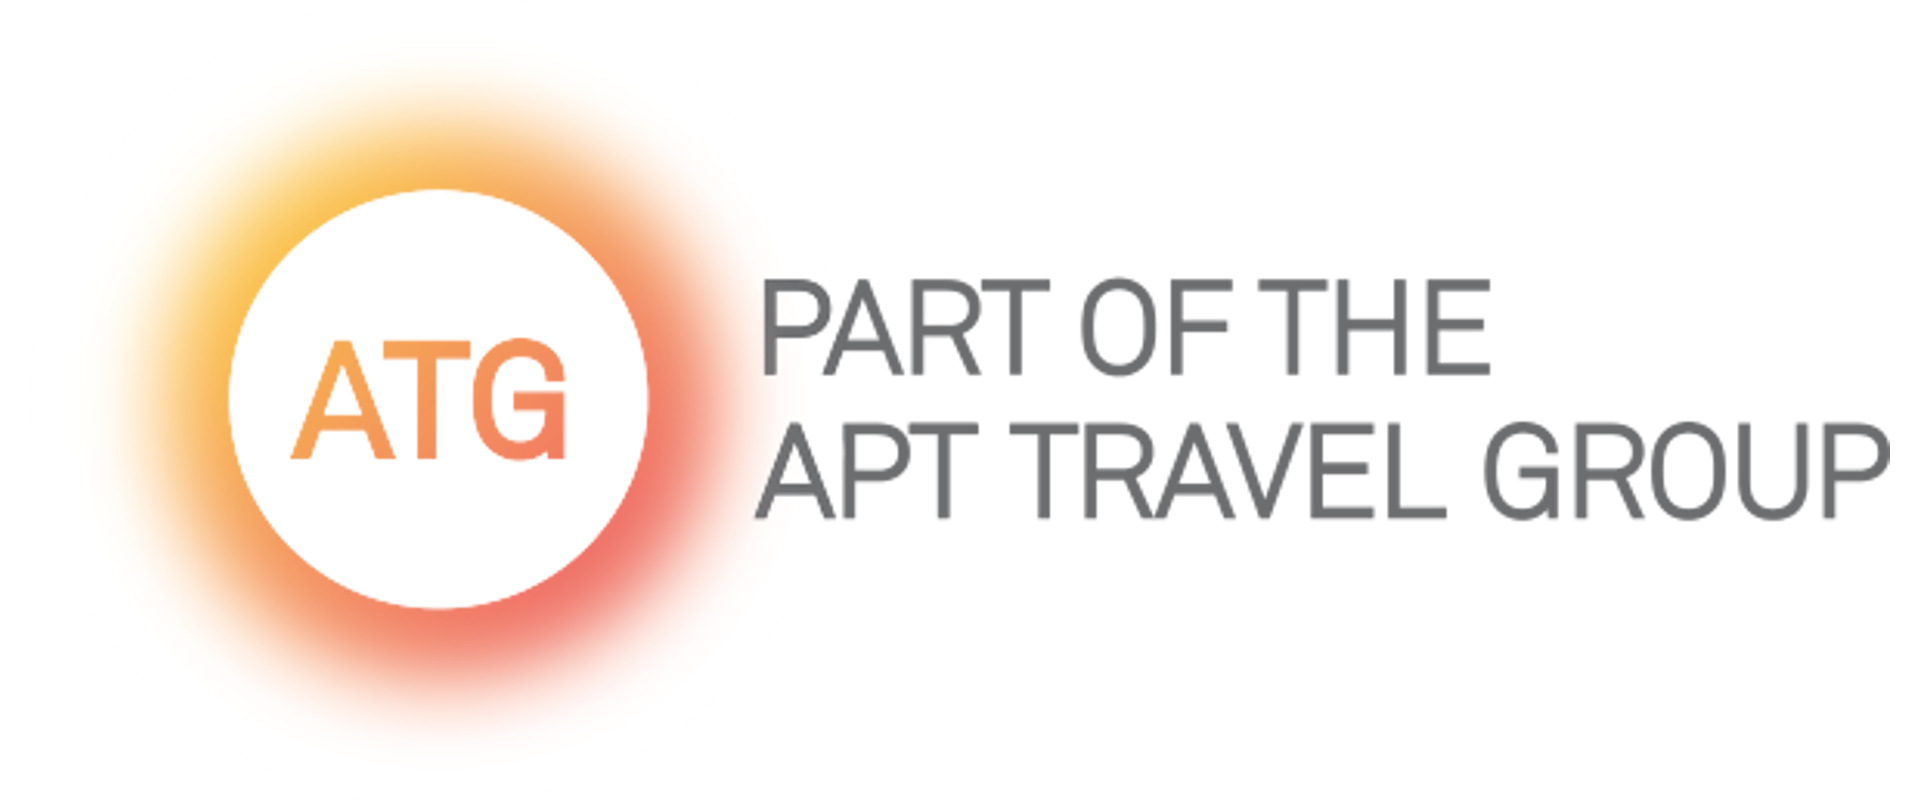 Part of the APT Travel Group